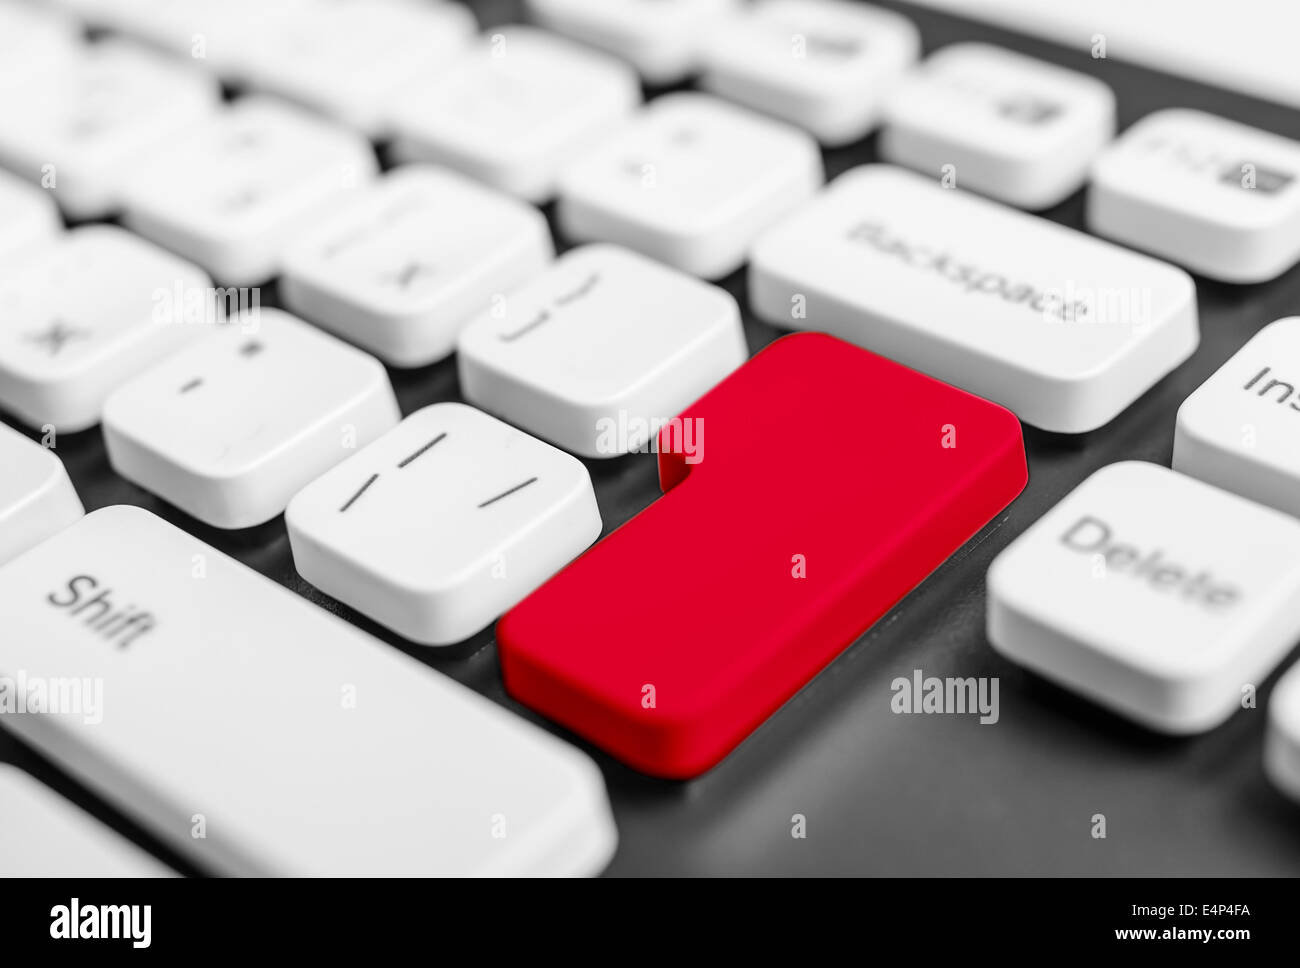 Keyboard with blank red button. Concept image. Stock Photo